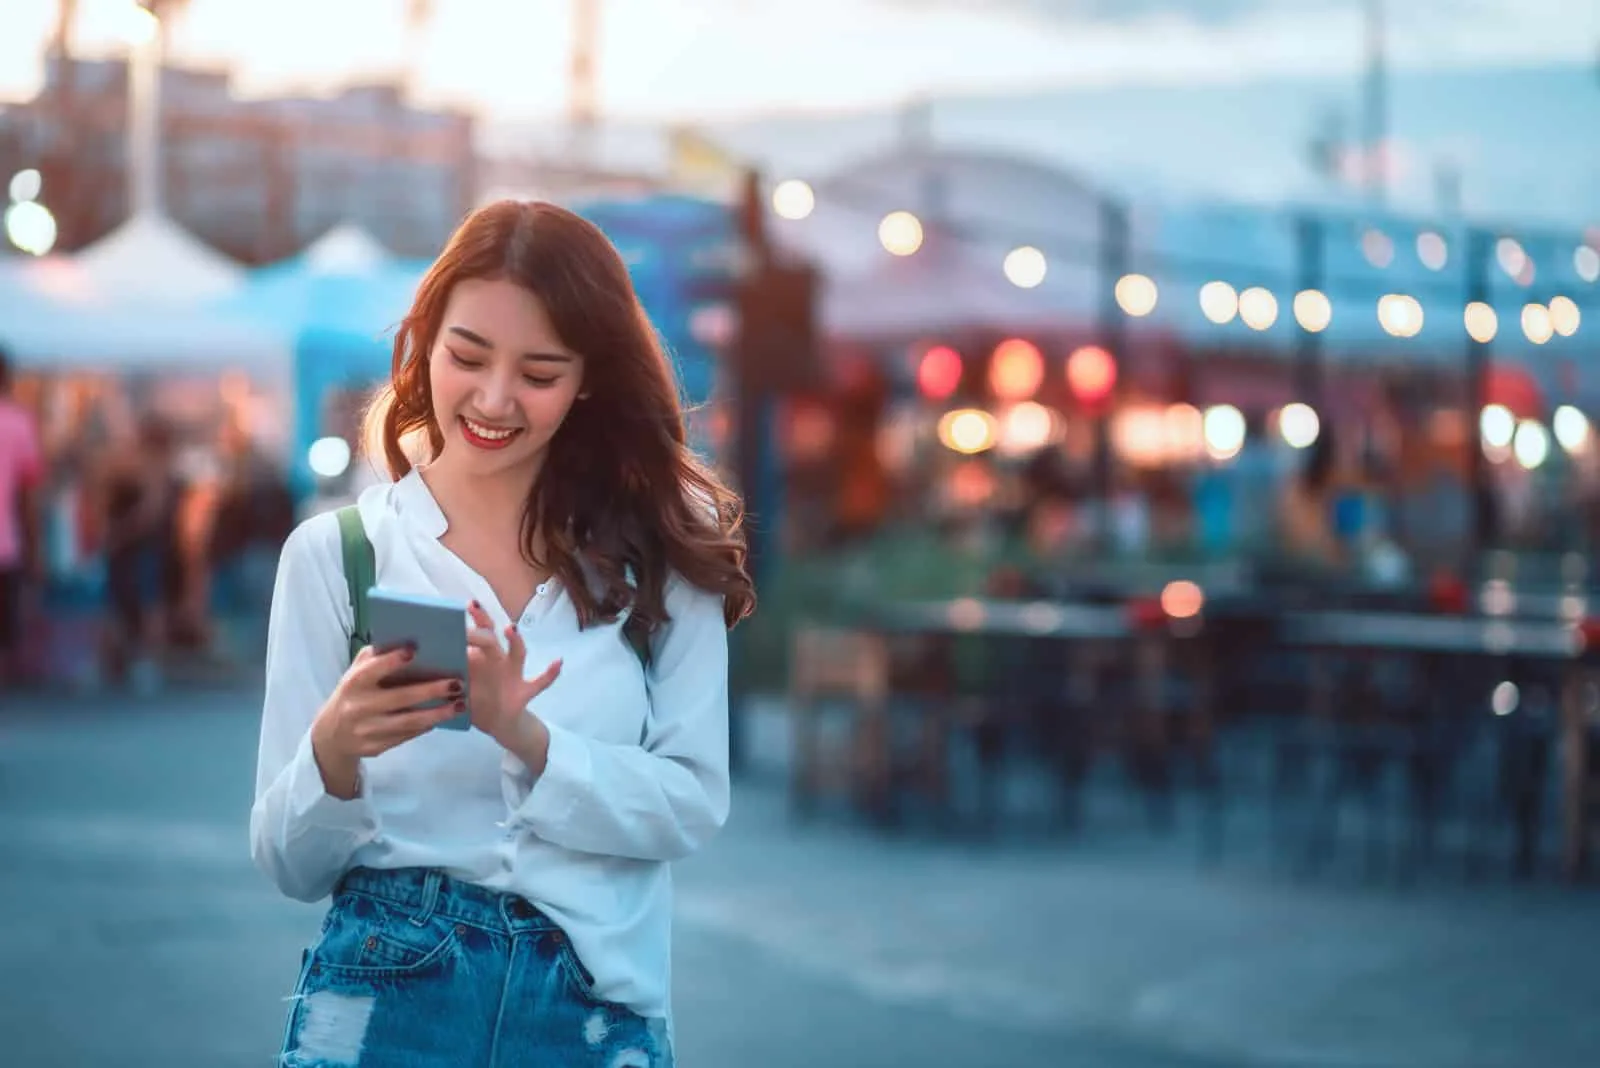 a smiling woman standing on the street and pressing a phone